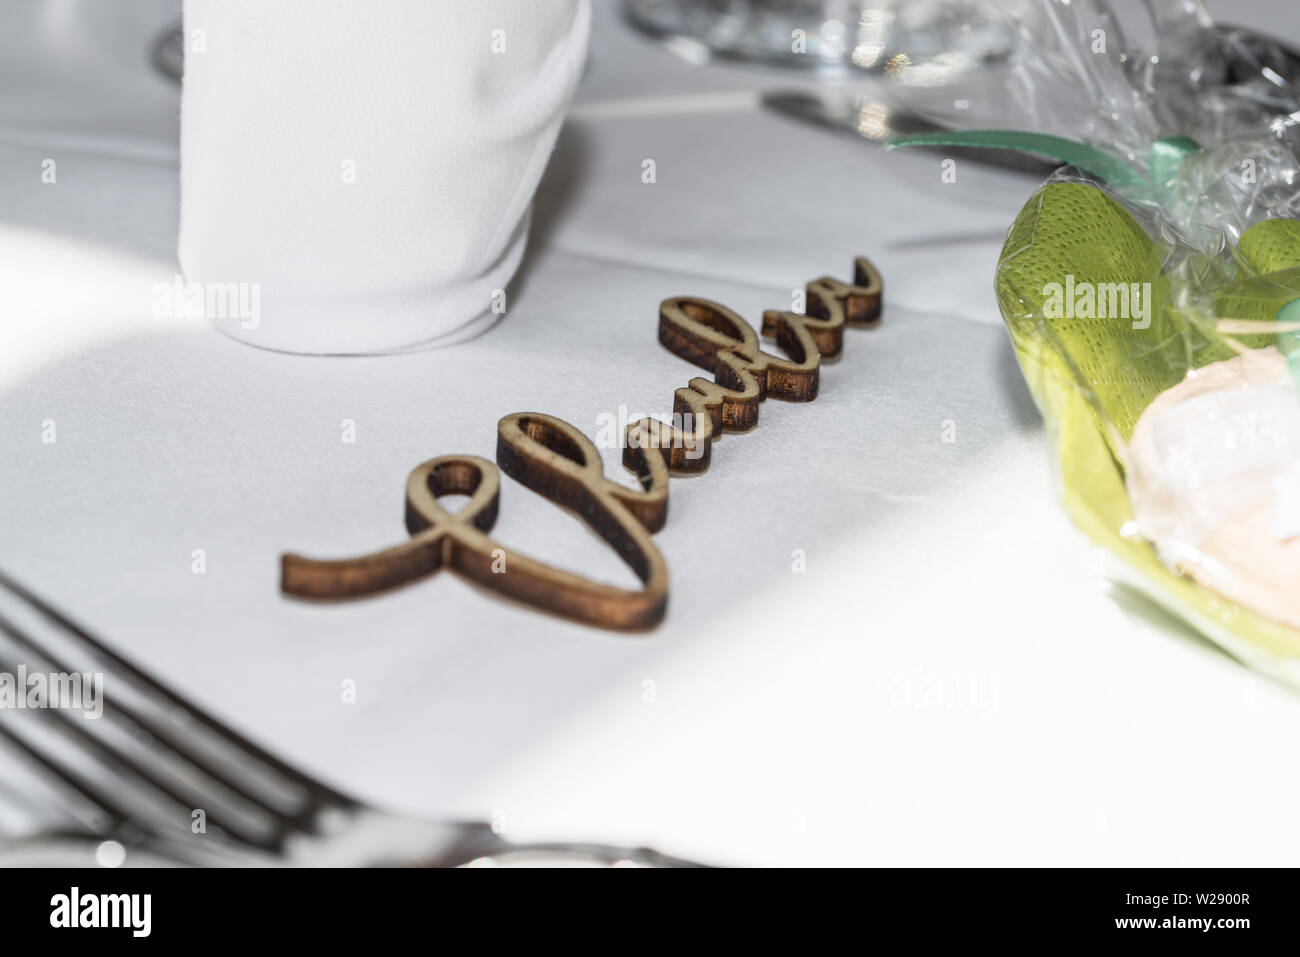 Table decoration of a wedding with glasses of cutlery and the name Claudia, Germany Stock Photo